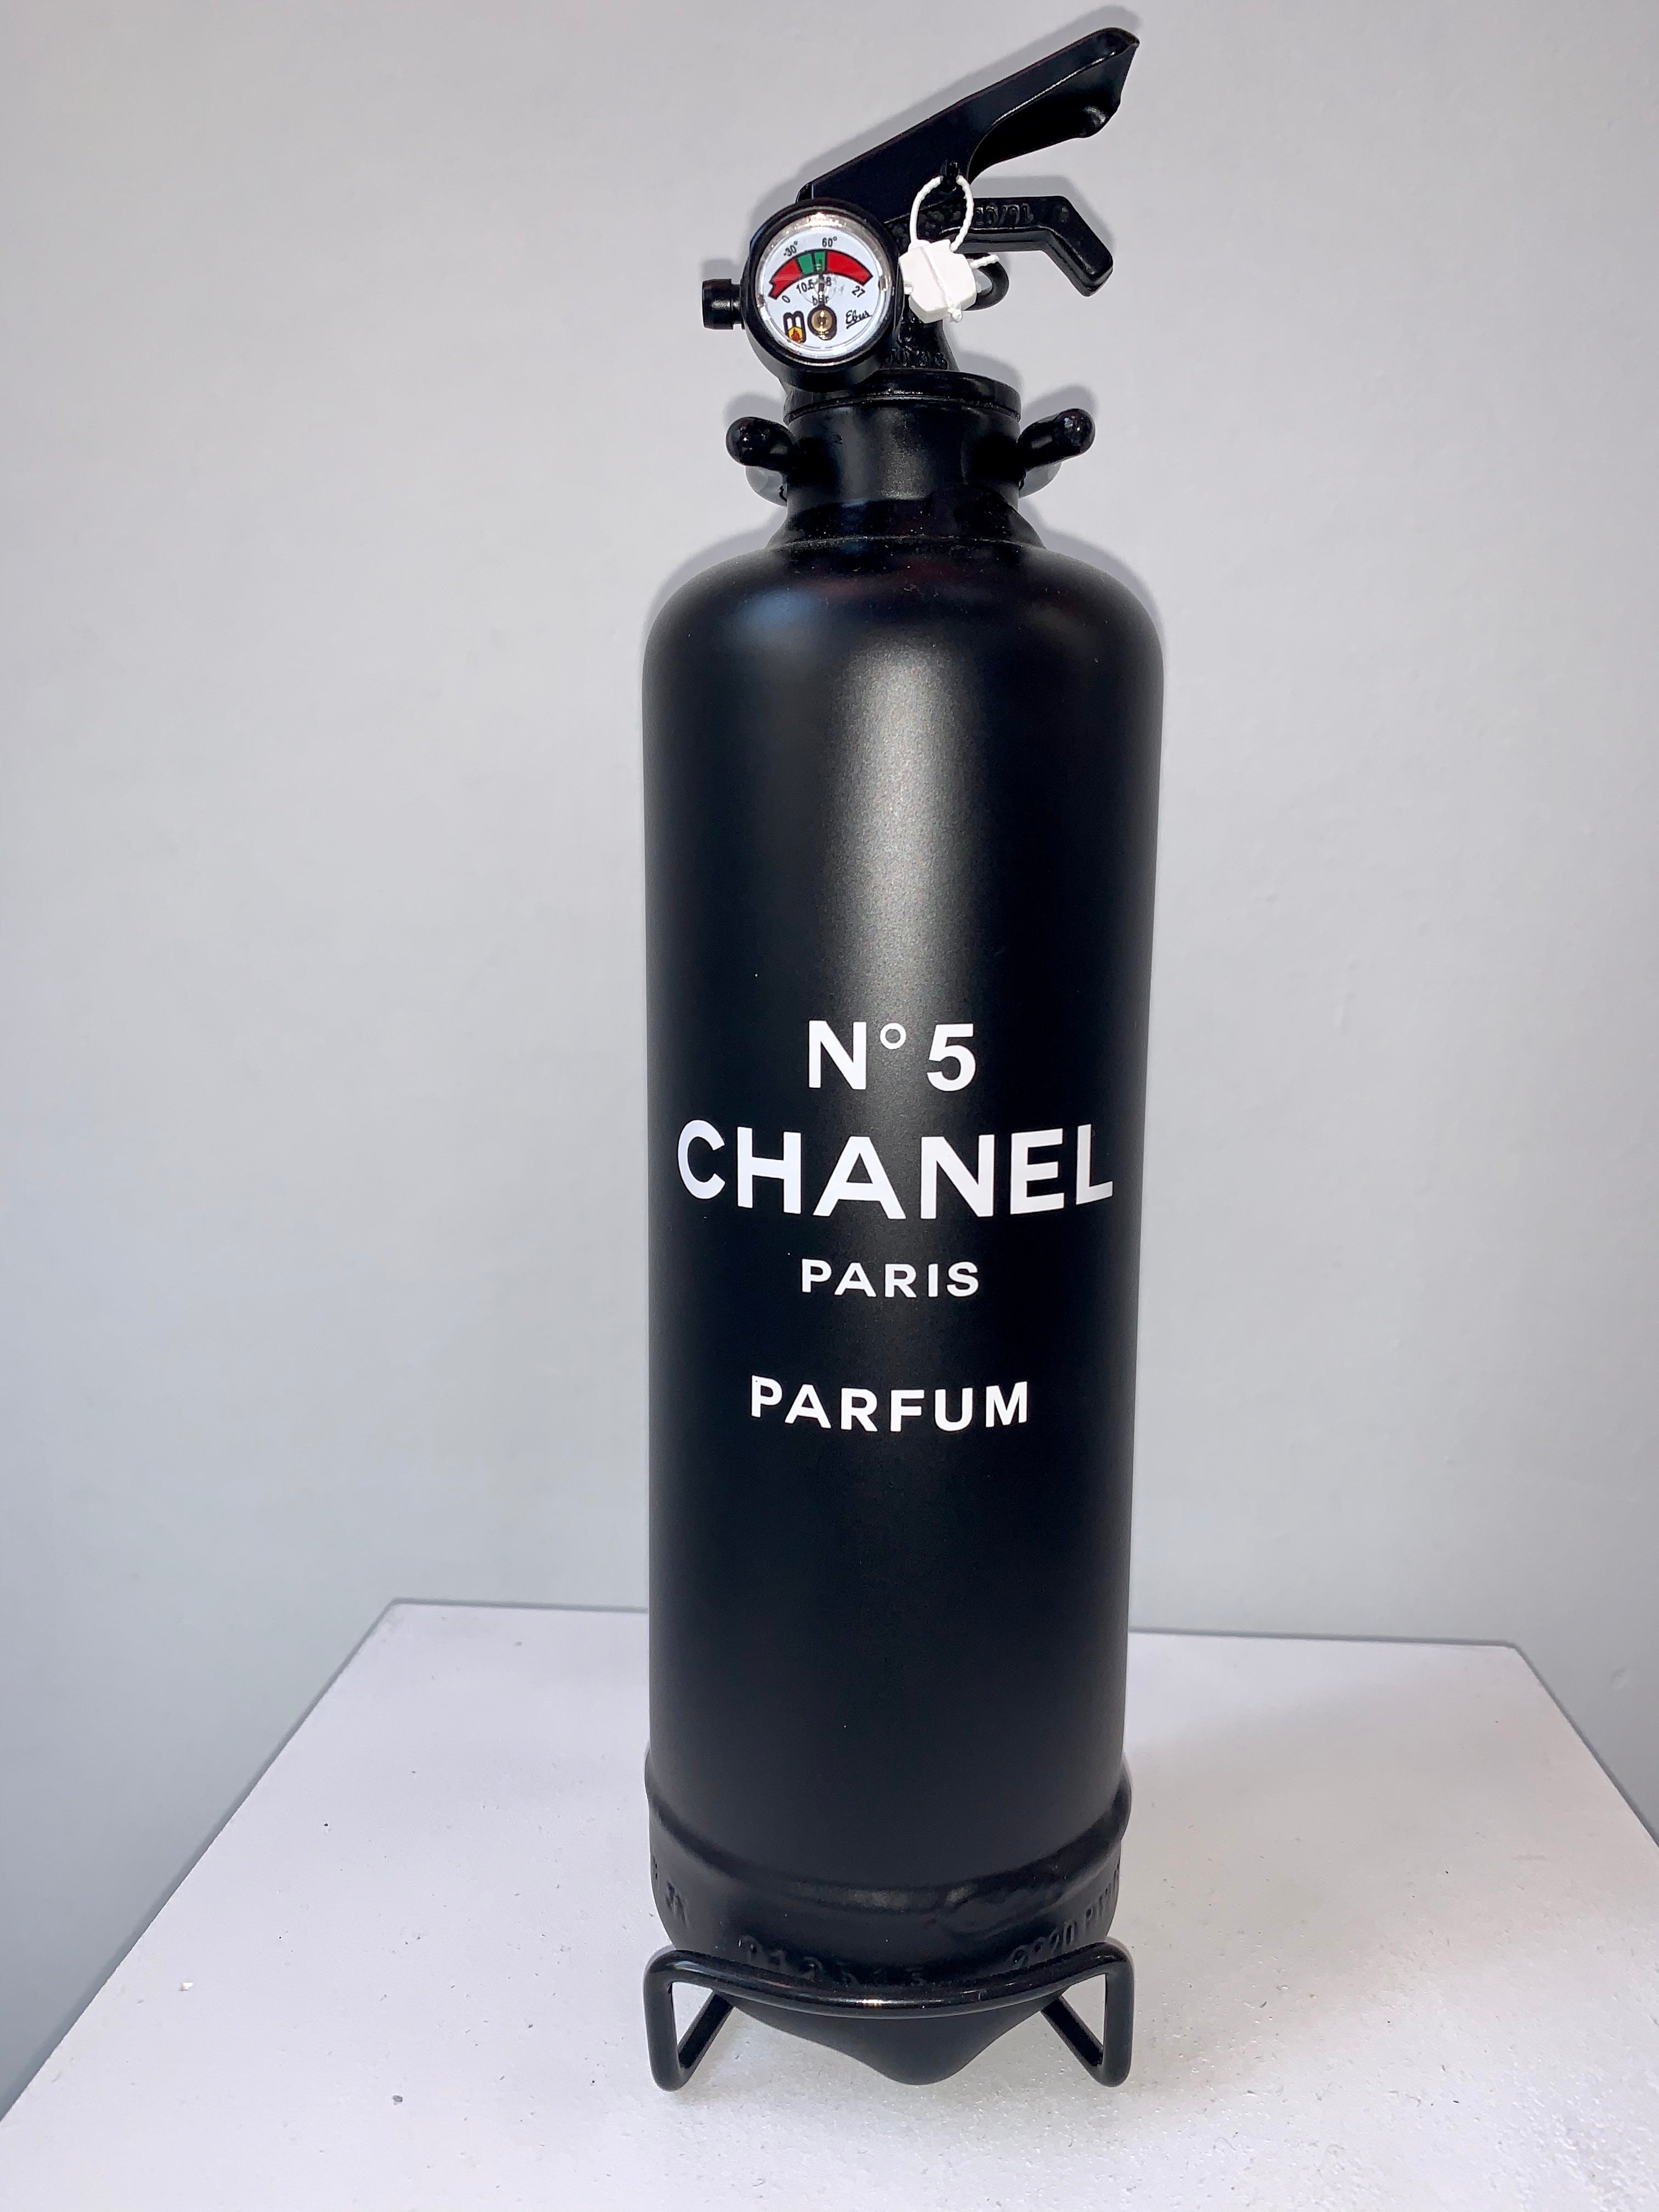 CHANEL FIRE EXTINGUISHER –